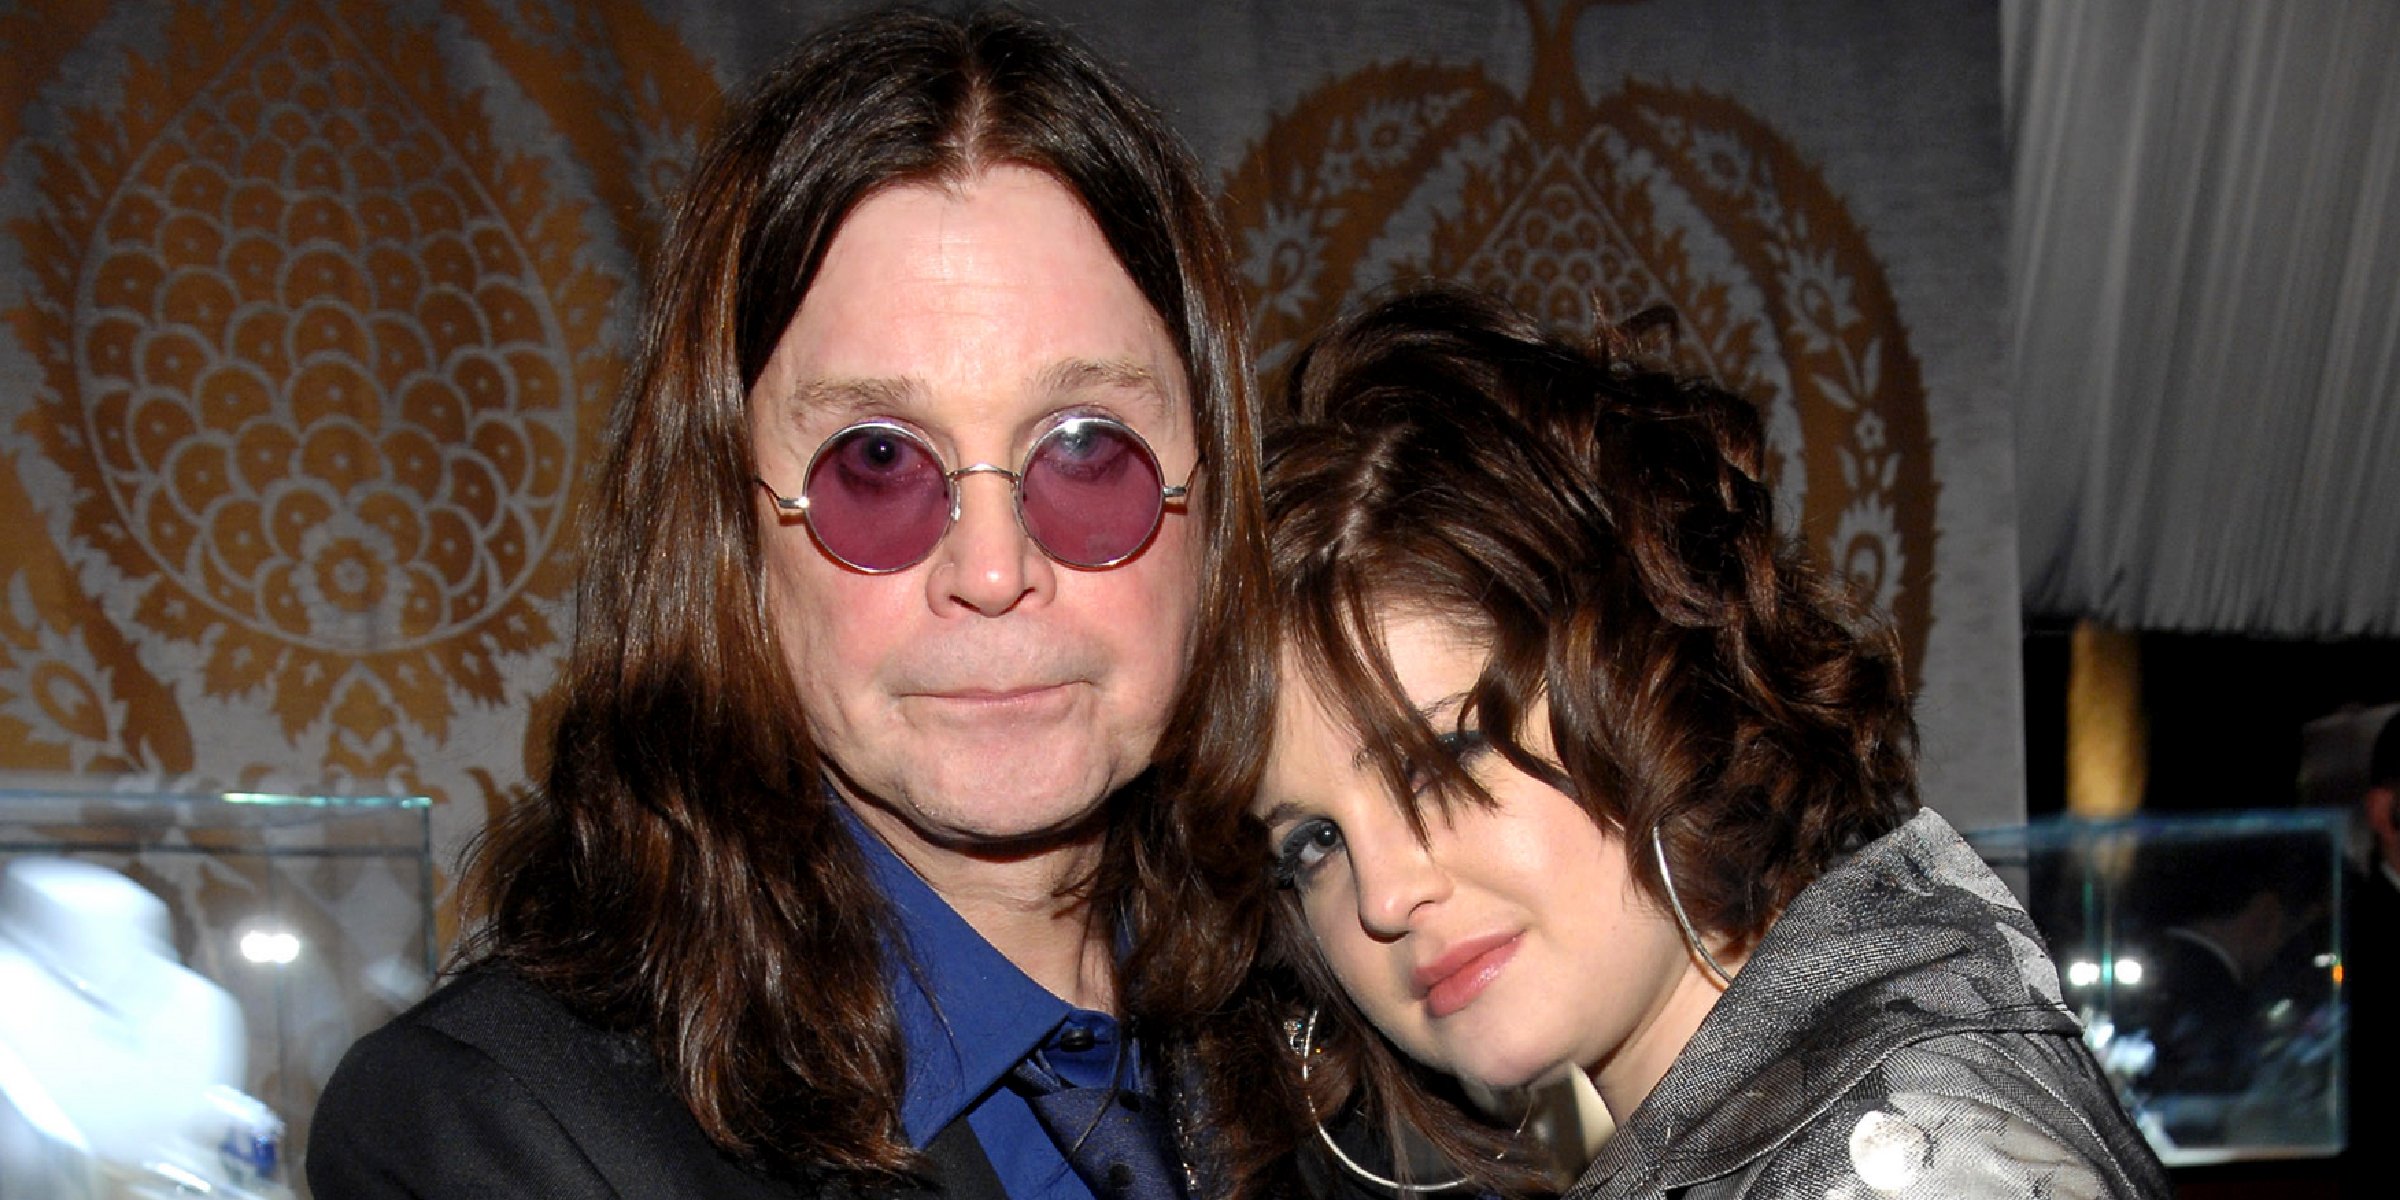 Ozzy Osbourne and Kelly Osbourne, 2007 | Source: Getty Images